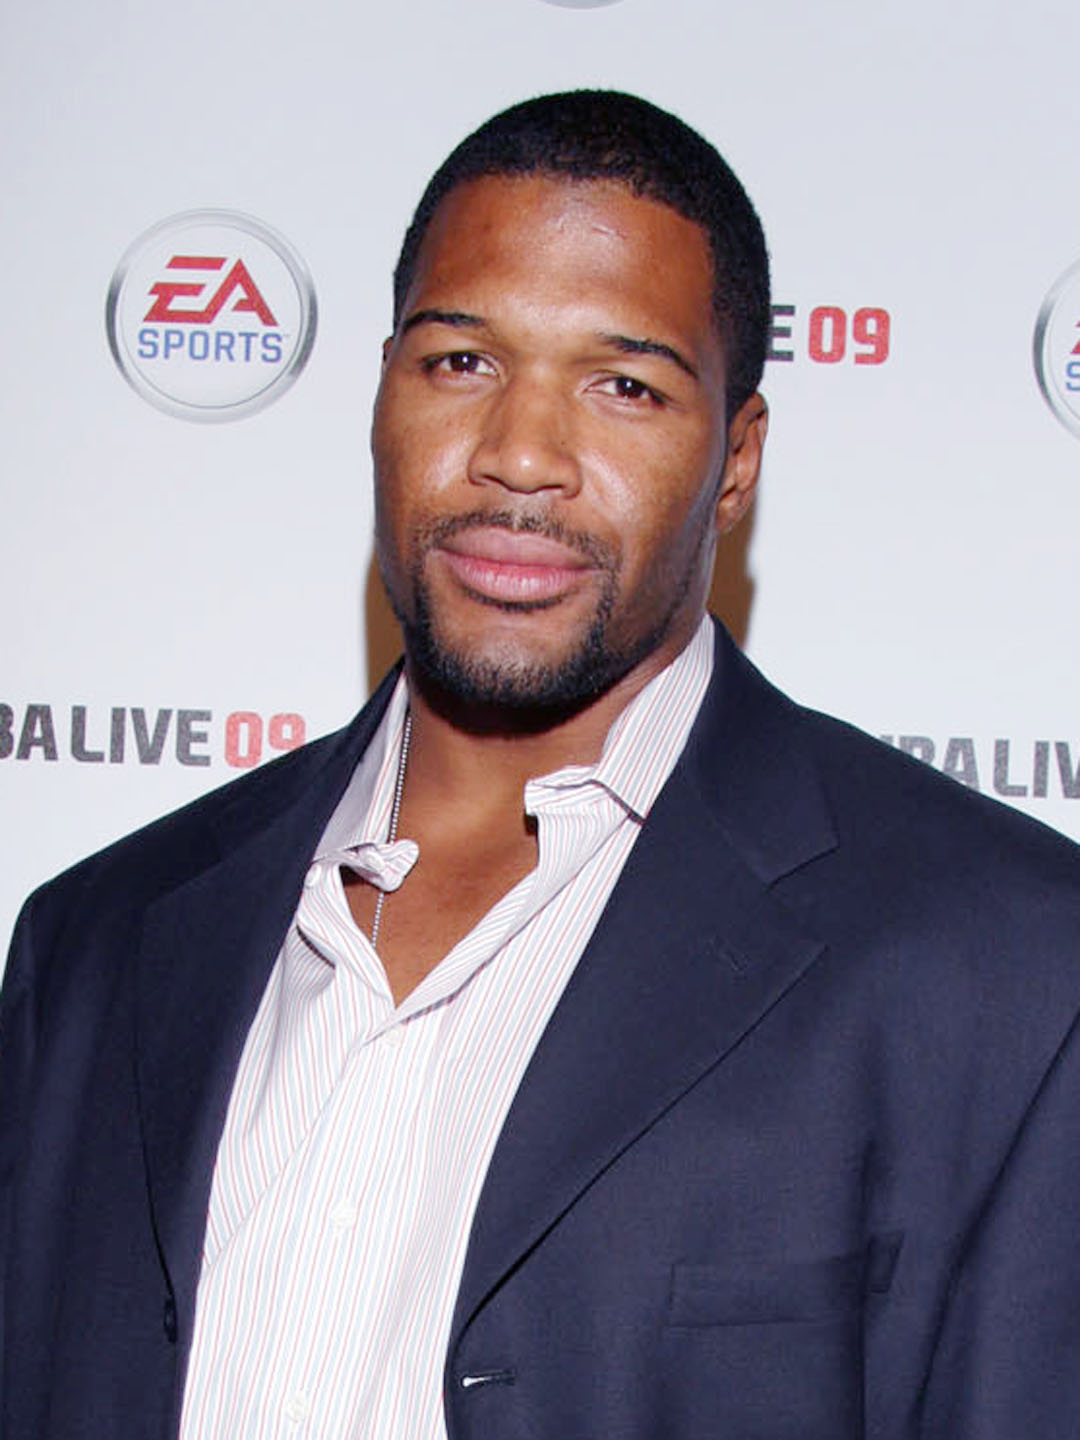 How tall is Michael Strahan?